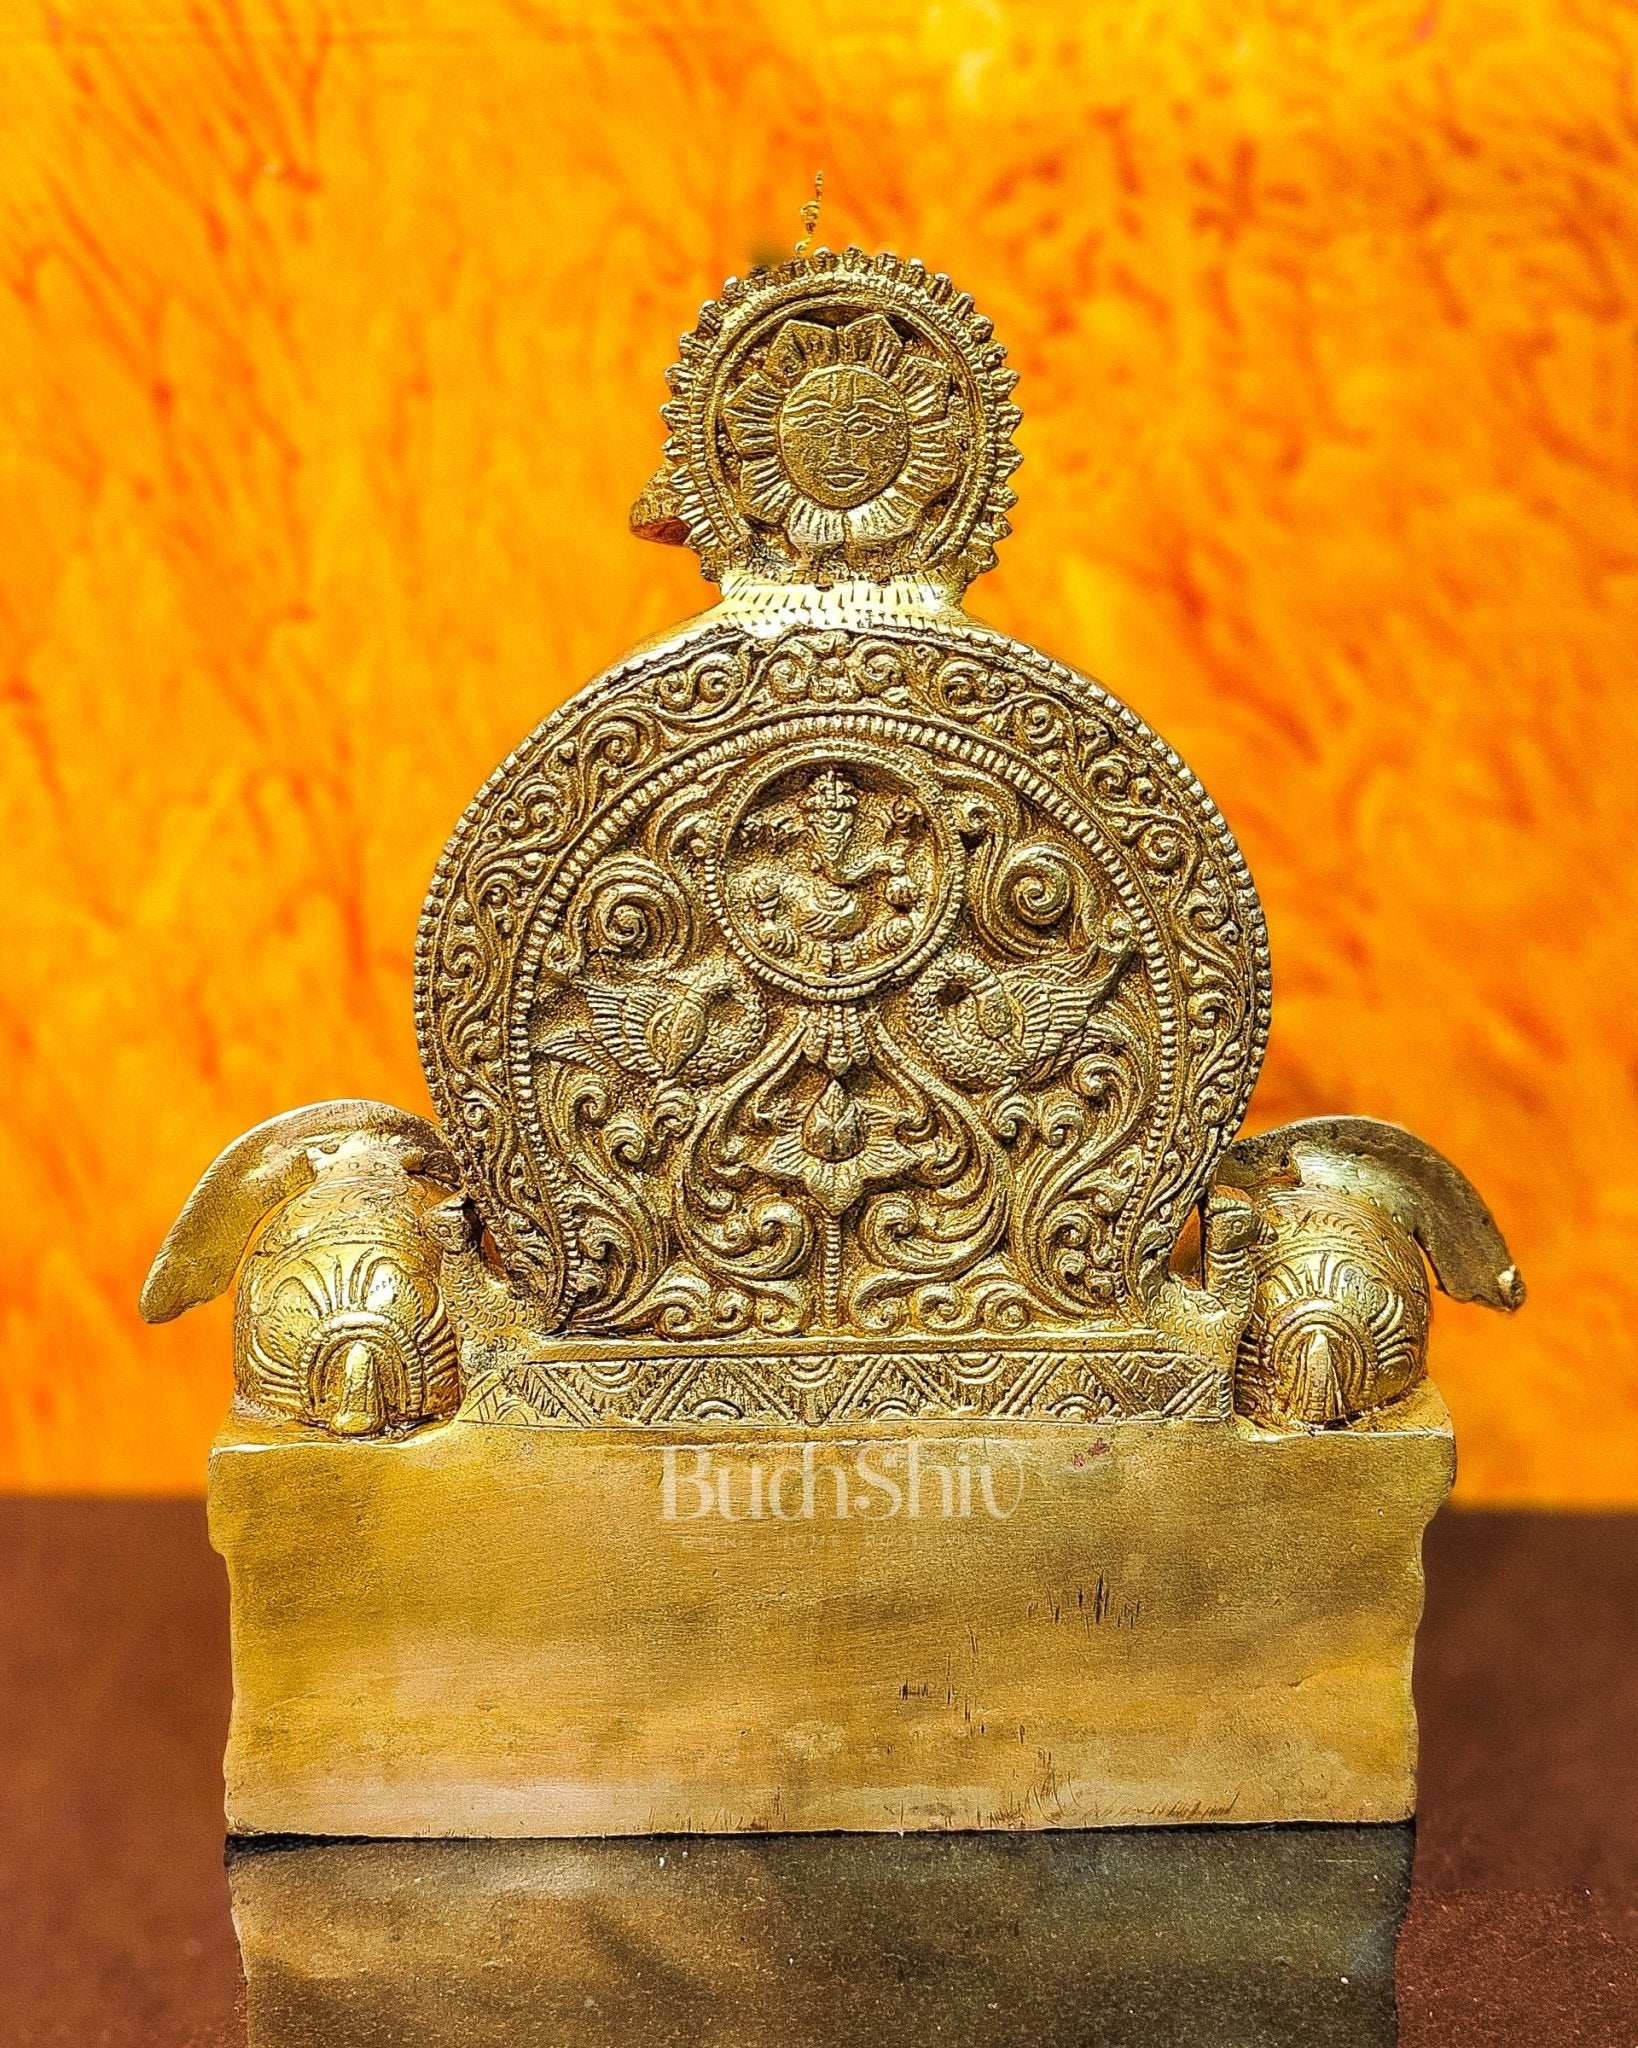 Fine Brass Handcrafted Lord Ganesha Statue - Exquisite Artistry - Budhshiv.com